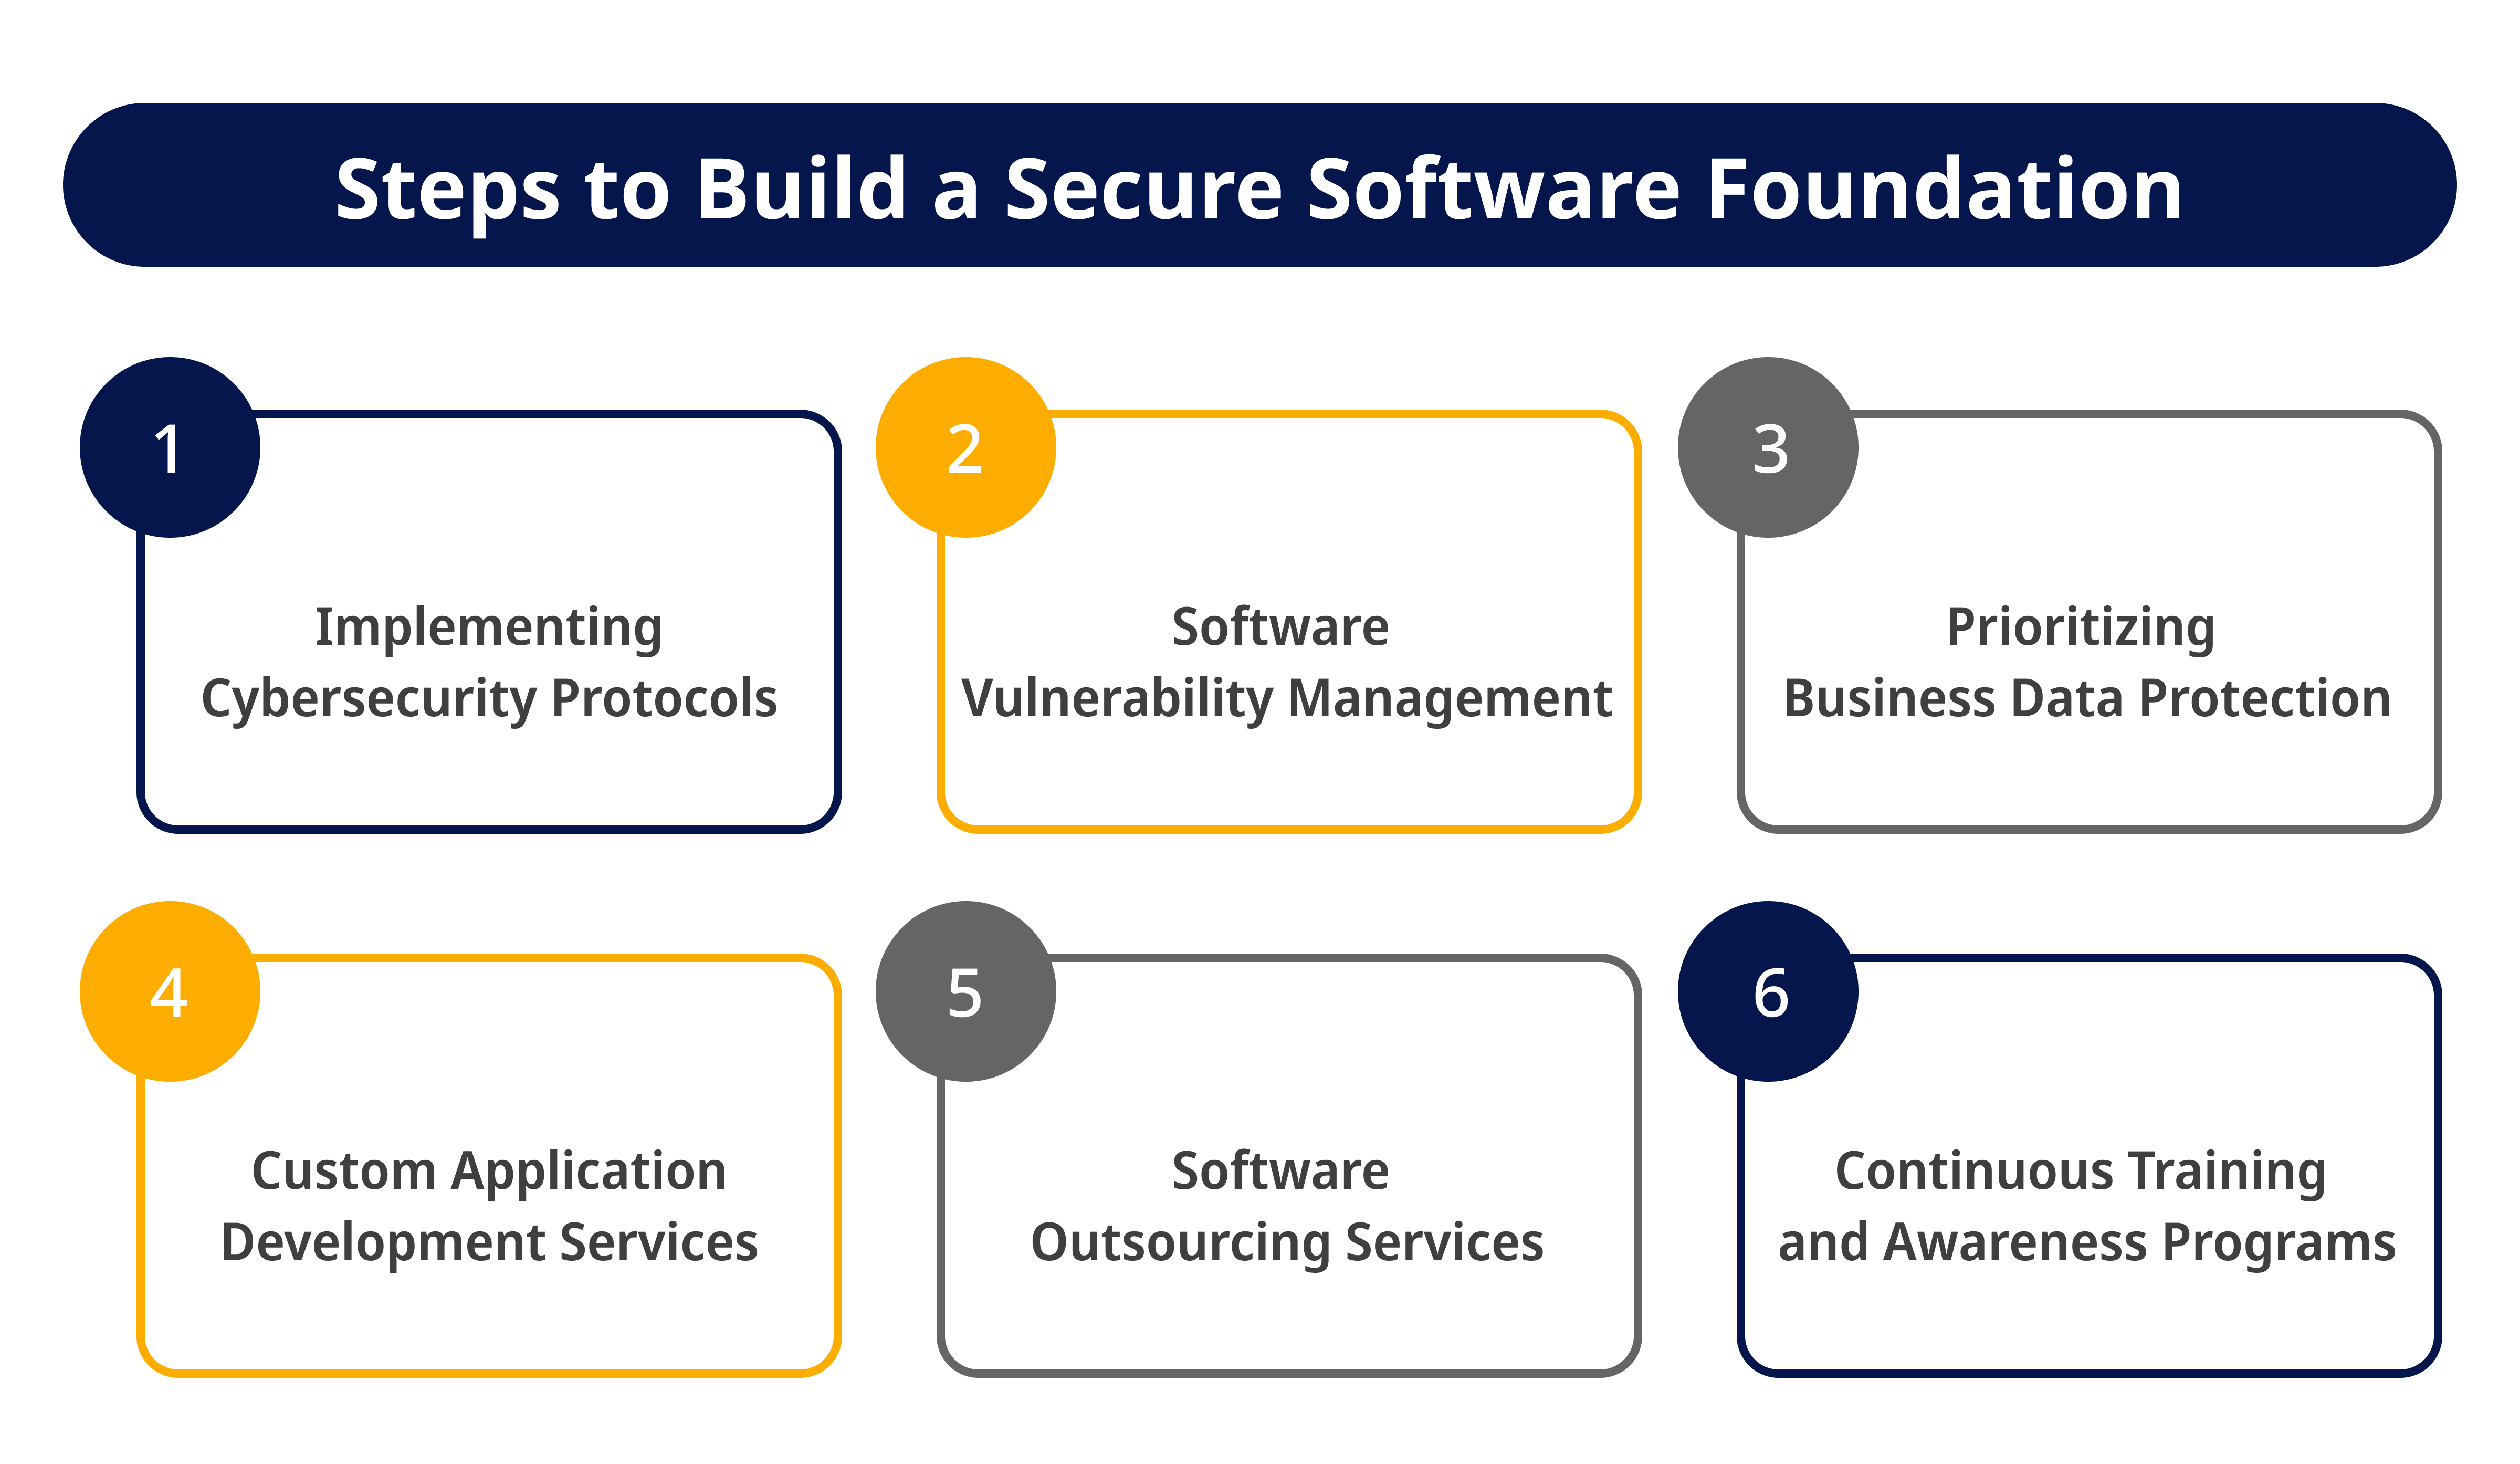 Steps to Build a Secure Software Foundation